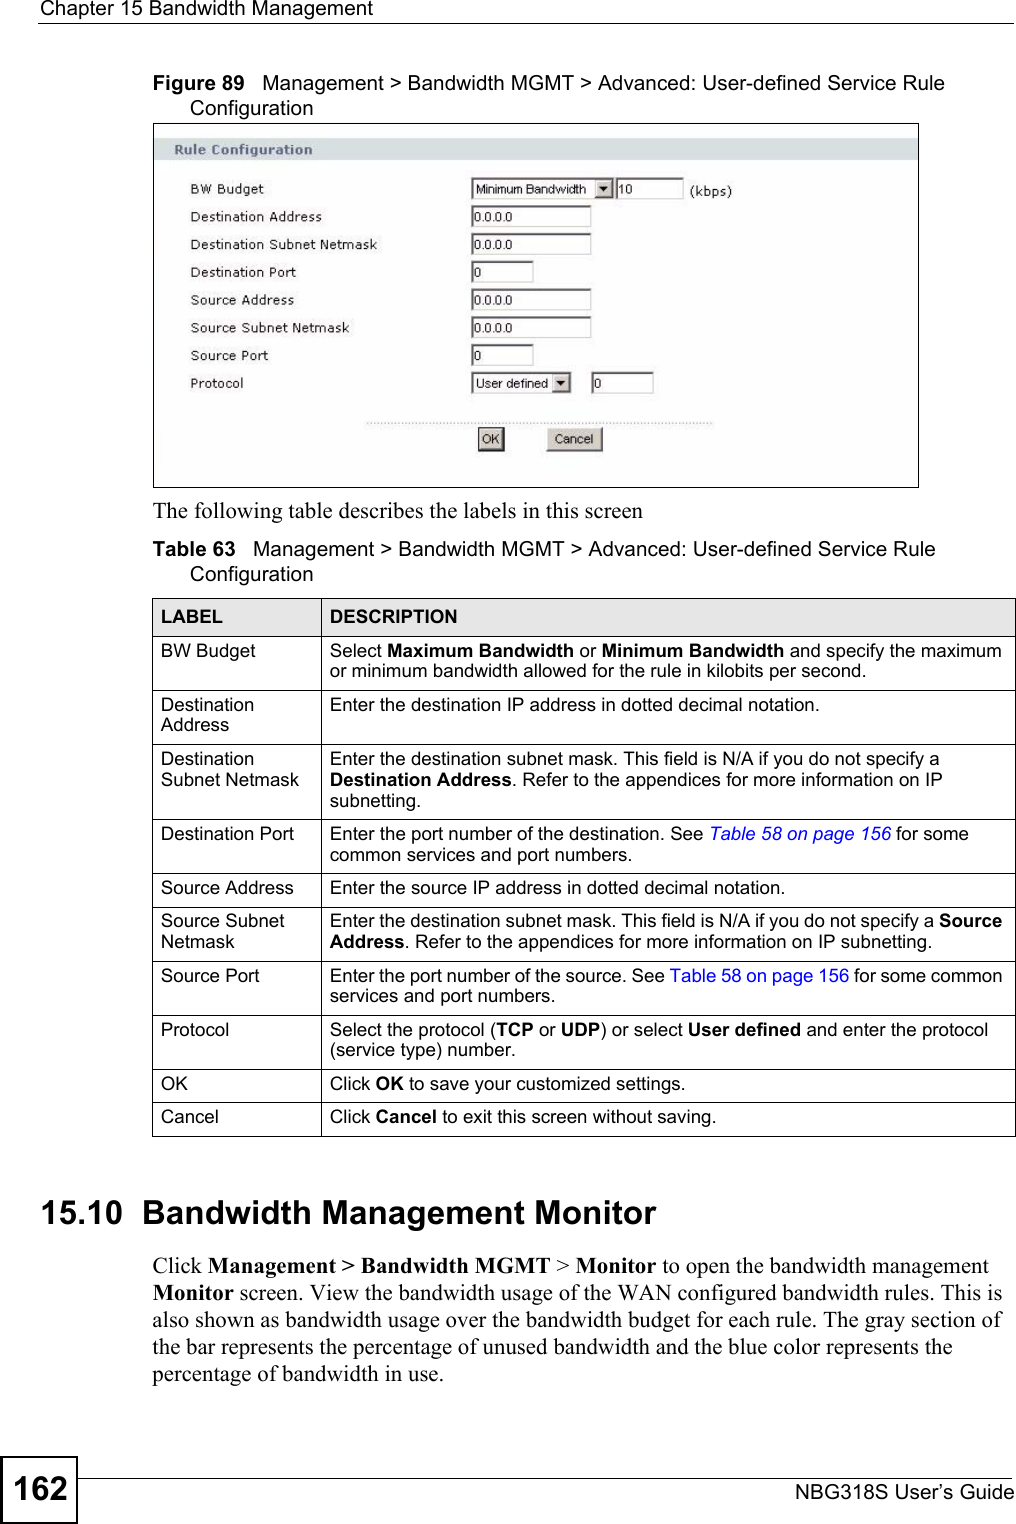 Chapter 15 Bandwidth ManagementNBG318S User’s Guide162Figure 89   Management &gt; Bandwidth MGMT &gt; Advanced: User-defined Service Rule Configuration The following table describes the labels in this screenTable 63   Management &gt; Bandwidth MGMT &gt; Advanced: User-defined Service Rule Configuration  15.10  Bandwidth Management Monitor    Click Management &gt; Bandwidth MGMT &gt; Monitor to open the bandwidth management Monitor screen. View the bandwidth usage of the WAN configured bandwidth rules. This is also shown as bandwidth usage over the bandwidth budget for each rule. The gray section of the bar represents the percentage of unused bandwidth and the blue color represents the percentage of bandwidth in use.LABEL DESCRIPTIONBW Budget Select Maximum Bandwidth or Minimum Bandwidth and specify the maximum or minimum bandwidth allowed for the rule in kilobits per second. Destination AddressEnter the destination IP address in dotted decimal notation.Destination Subnet NetmaskEnter the destination subnet mask. This field is N/A if you do not specify a Destination Address. Refer to the appendices for more information on IP subnetting.Destination Port Enter the port number of the destination. See Table 58 on page 156 for some common services and port numbers.Source Address Enter the source IP address in dotted decimal notation.Source Subnet NetmaskEnter the destination subnet mask. This field is N/A if you do not specify a Source Address. Refer to the appendices for more information on IP subnetting.Source Port Enter the port number of the source. See Table 58 on page 156 for some common services and port numbers.Protocol Select the protocol (TCP or UDP) or select User defined and enter the protocol (service type) number. OK Click OK to save your customized settings.Cancel Click Cancel to exit this screen without saving.